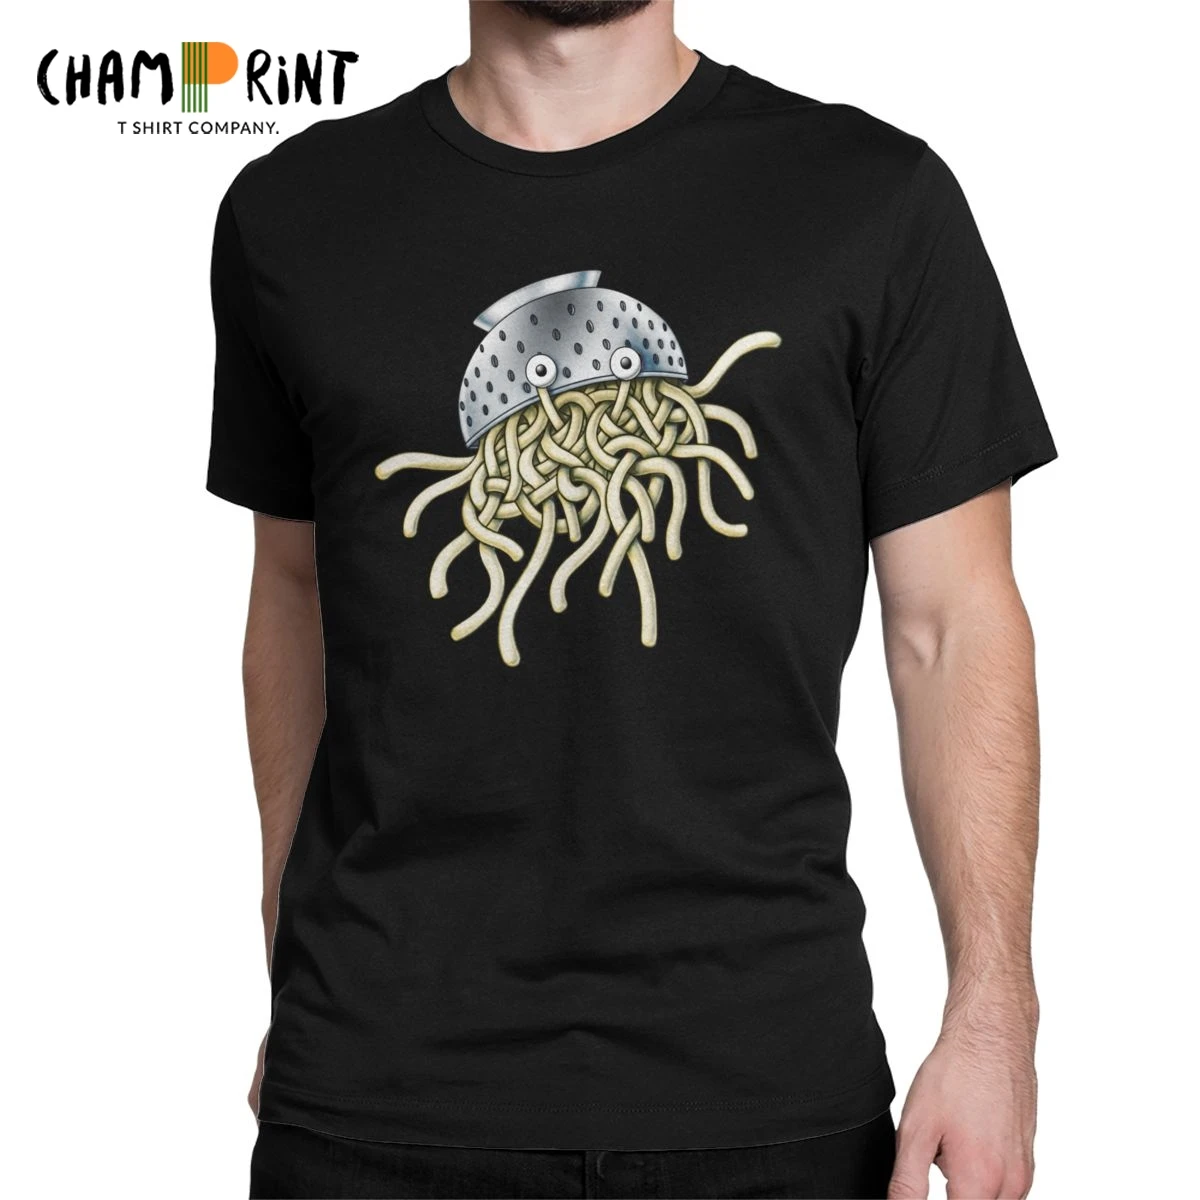 

Flying Spaghetti Monsterism Monster With Colander T Shirts Men Funny T-Shirt Pastafarianism Fsm Religion Church Tees 5XL